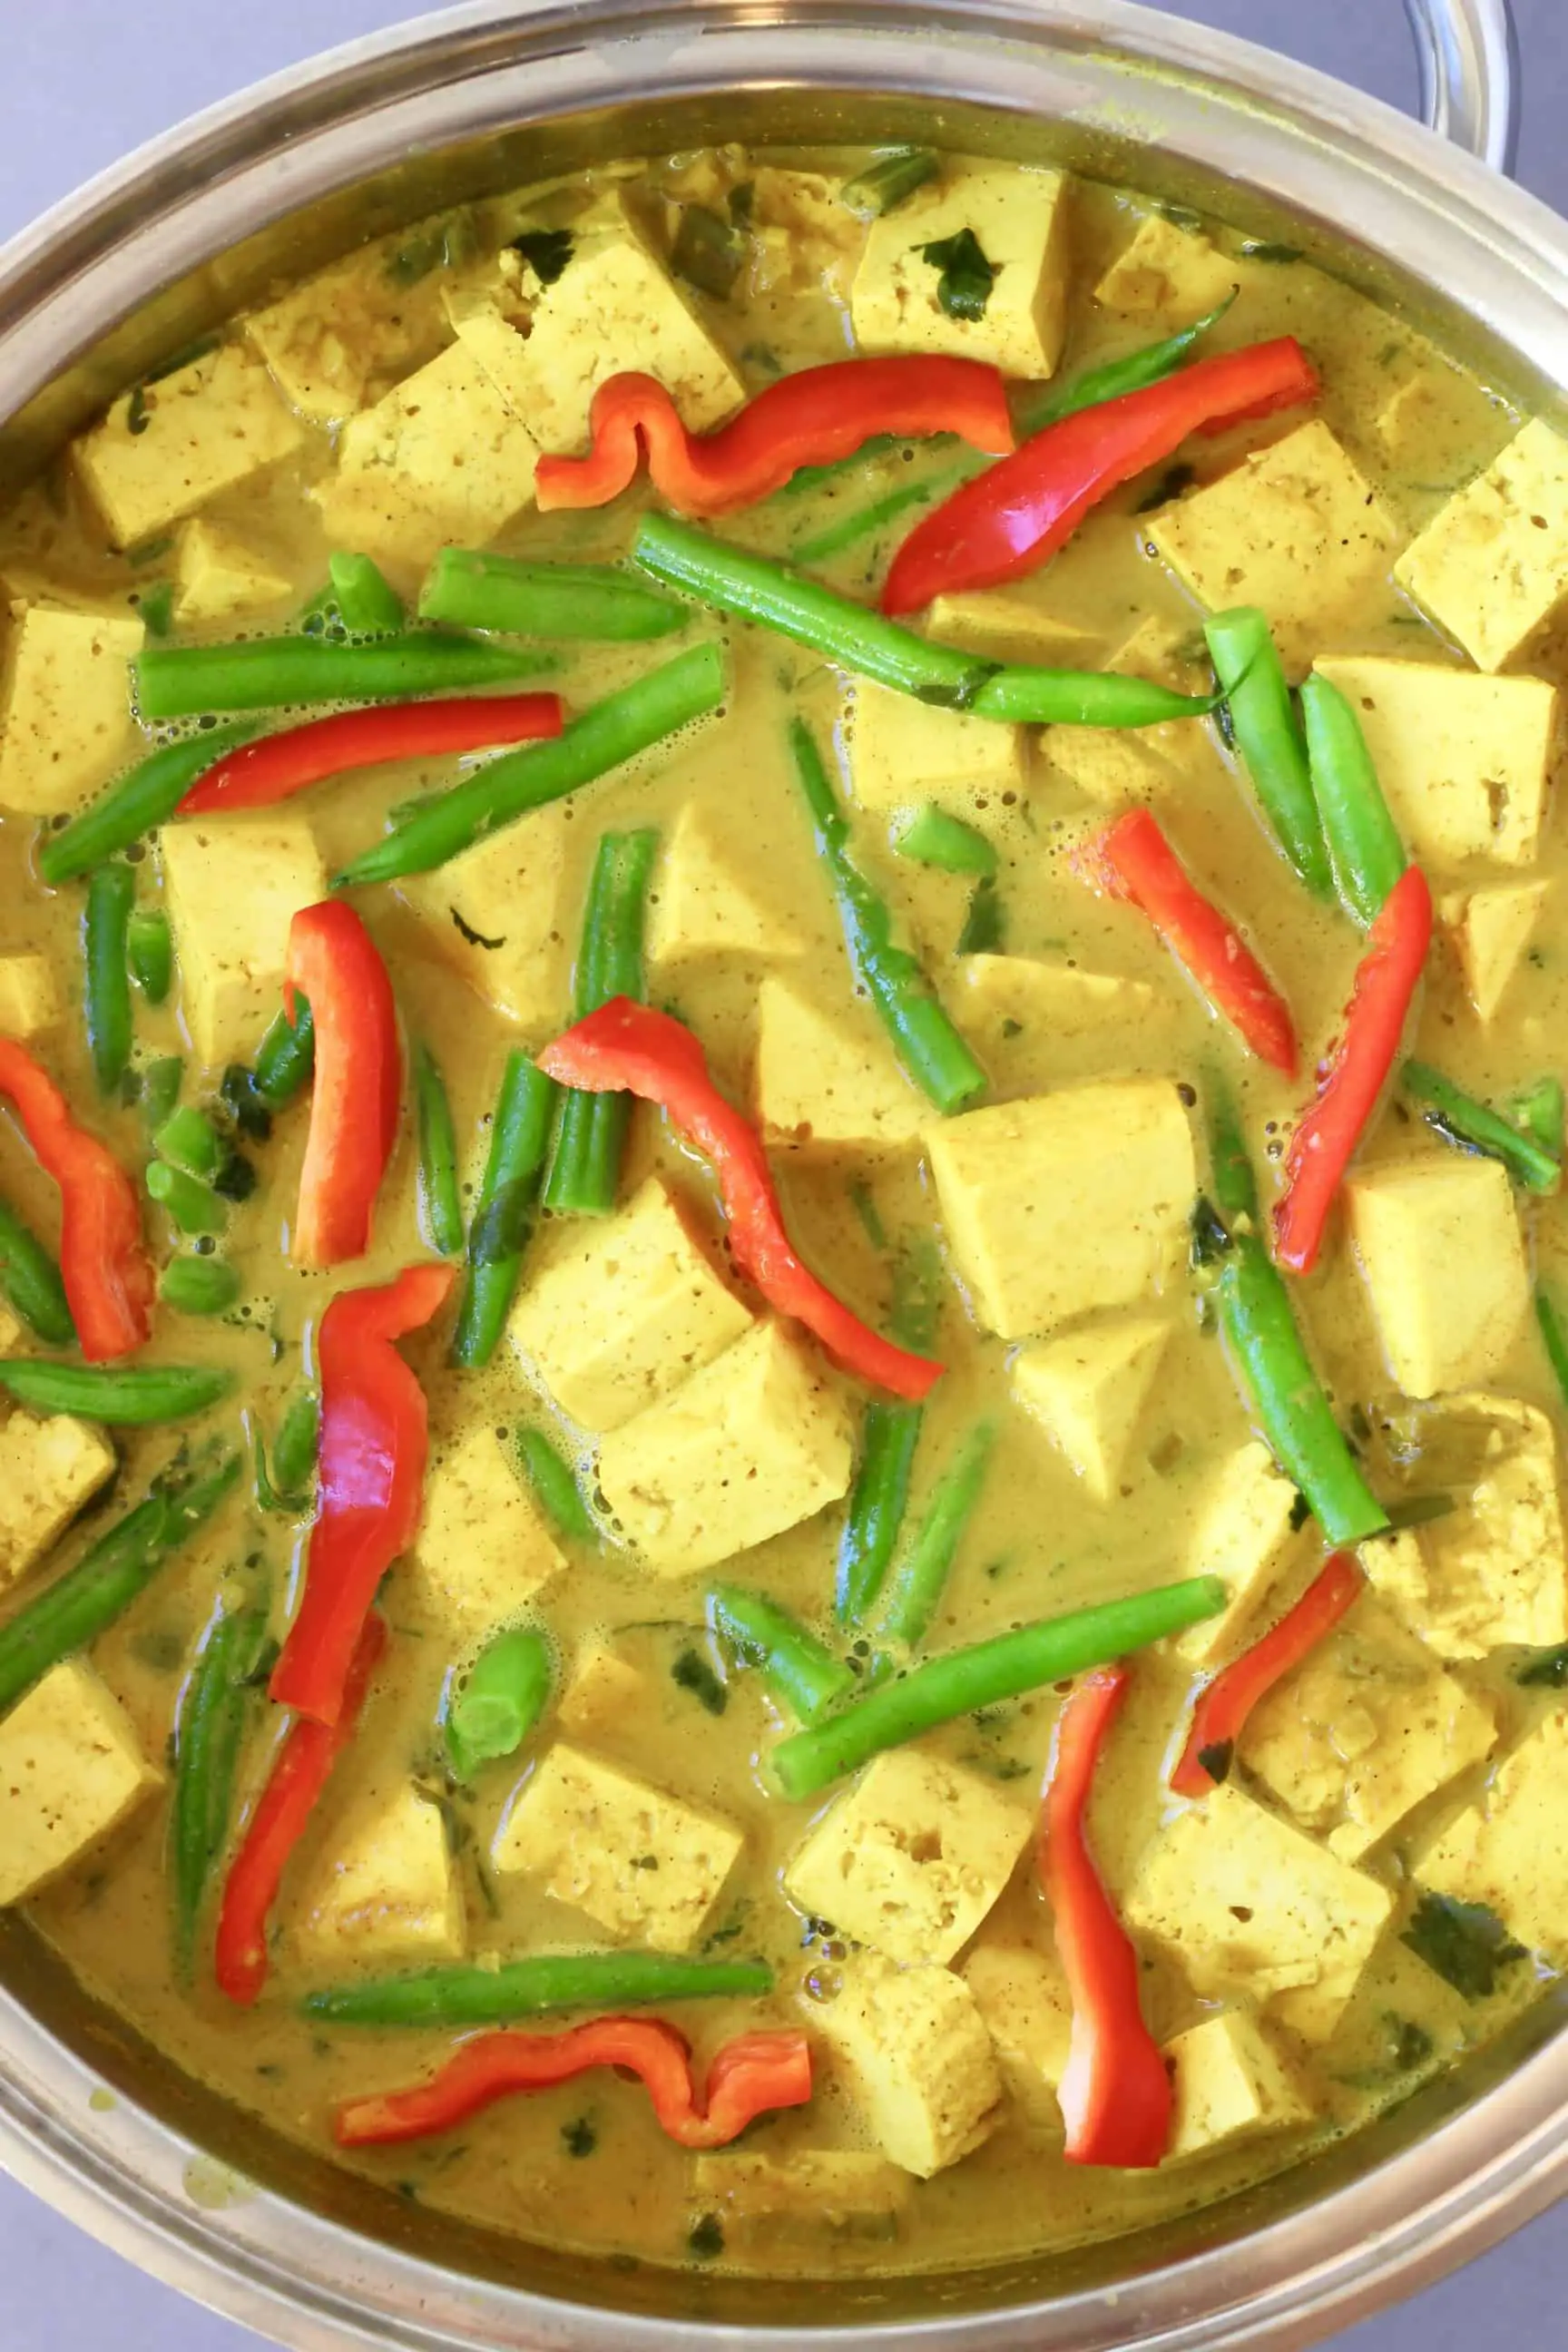 Cubes of tofu, green beans and strips of red pepper in a yellow curry sauce in a silver pan